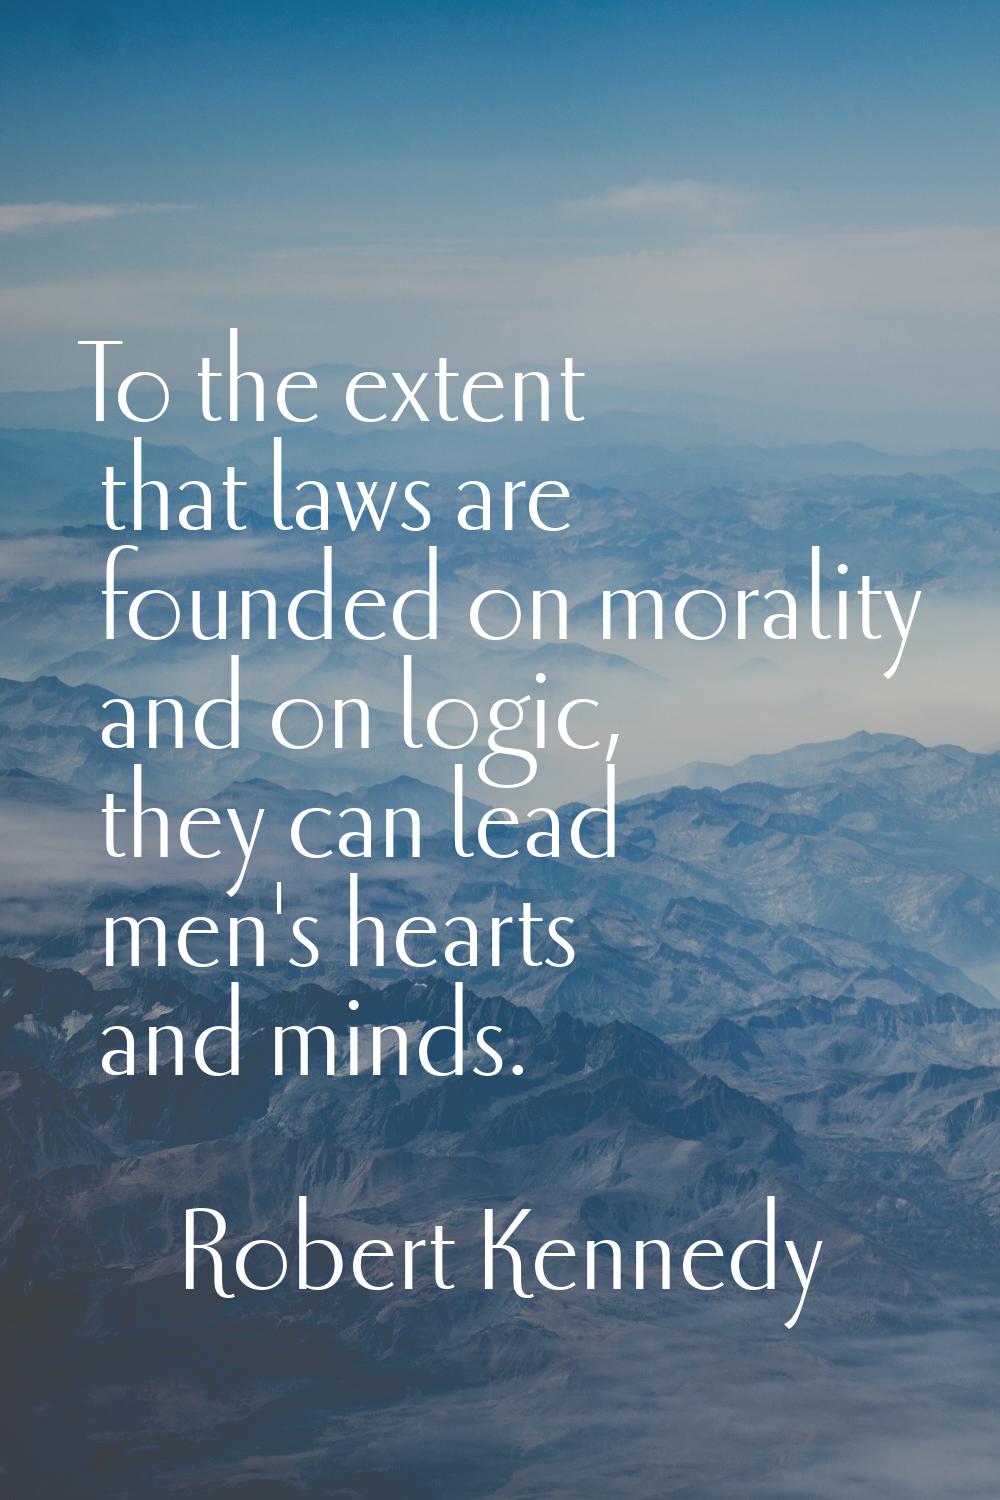 To the extent that laws are founded on morality and on logic, they can lead men's hearts and minds.